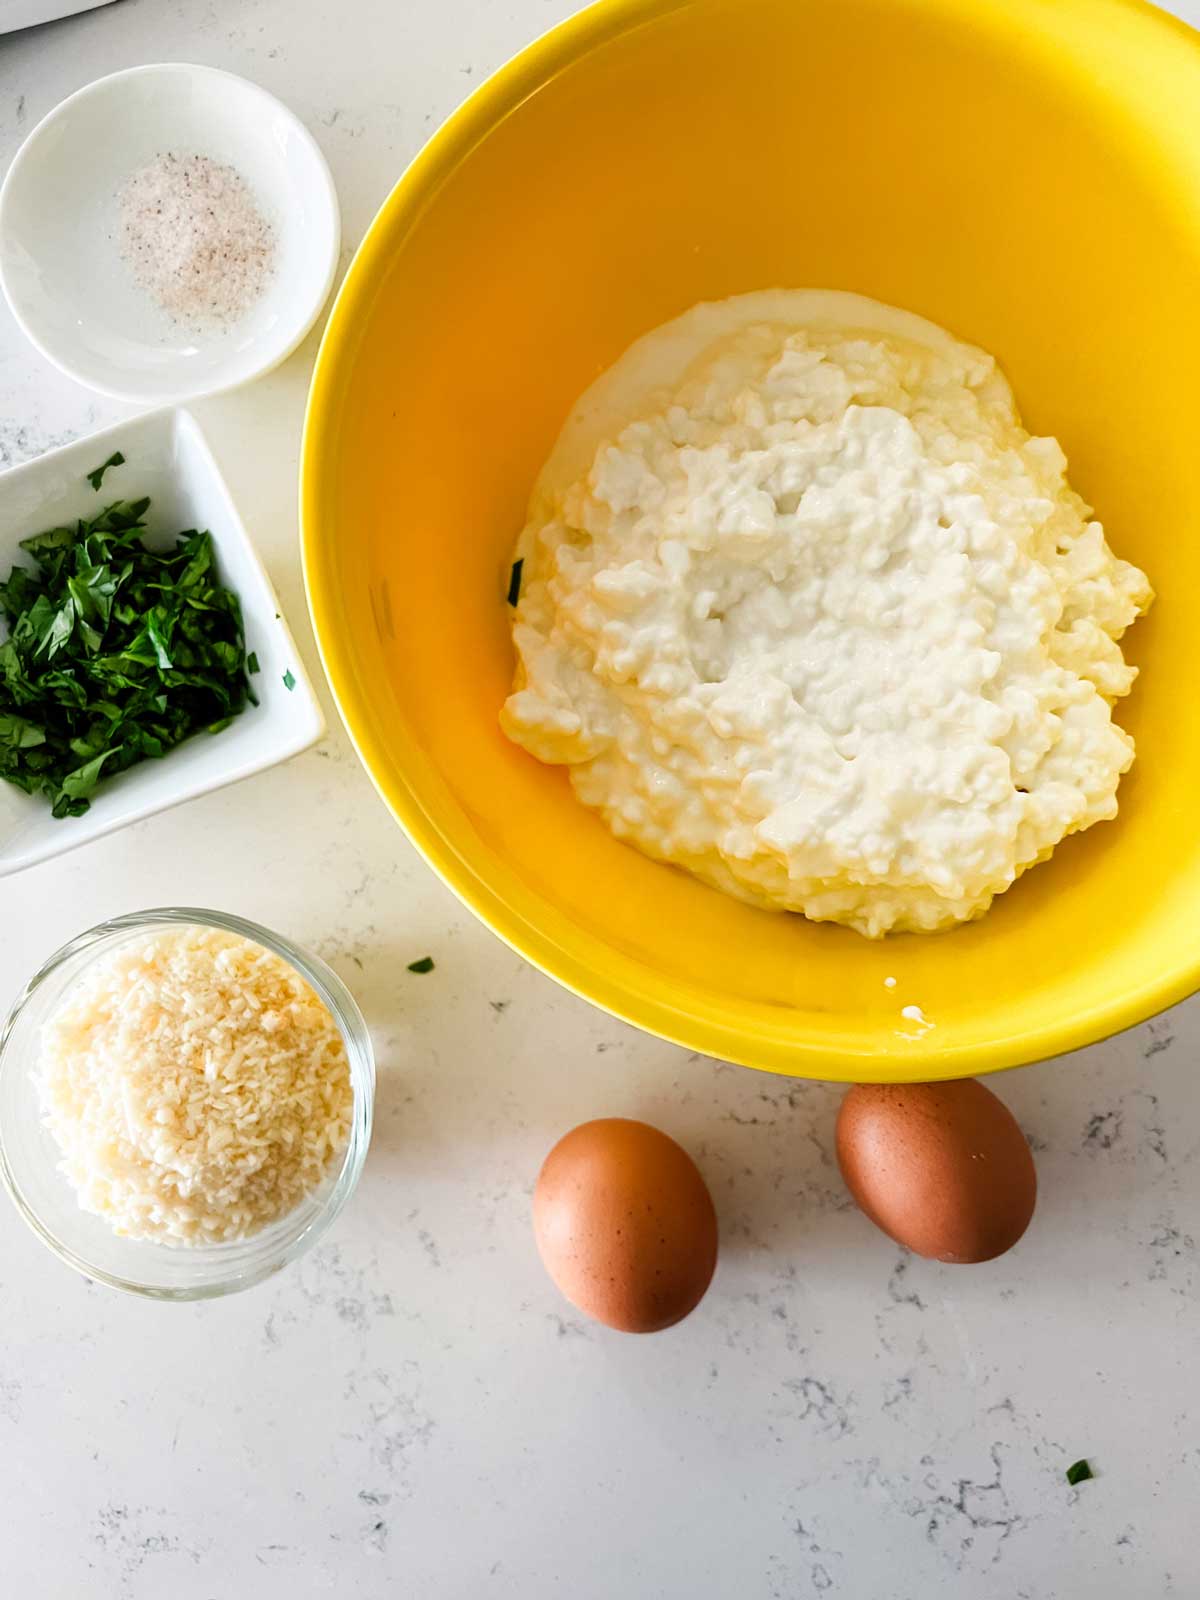 Overhead photo of the cottage cheese mixture for lasagna: cottage cheese, egg, parmesan, parsley, and salt.